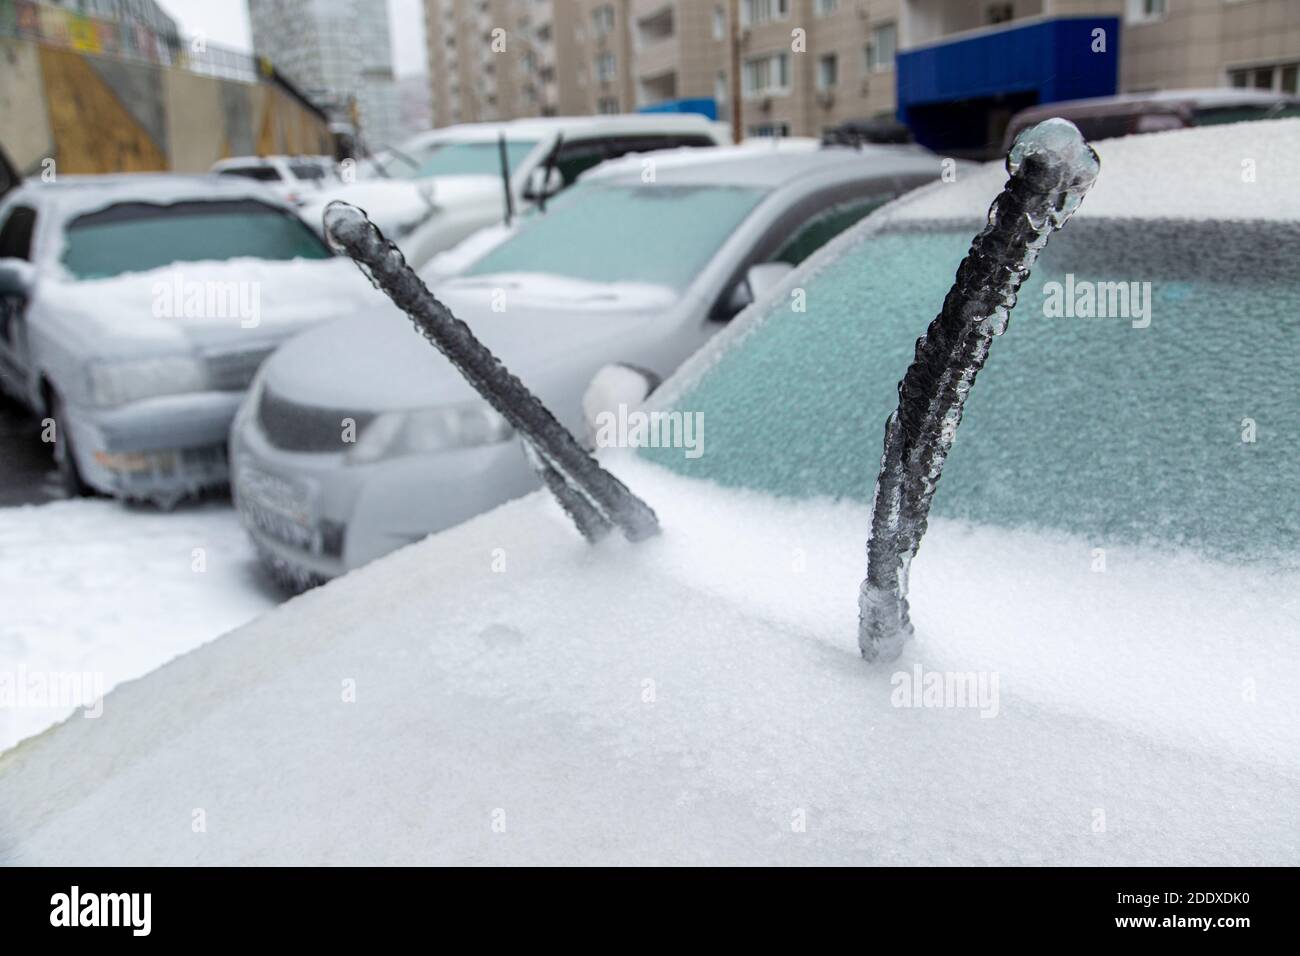 The wipers of a white passenger car are very icy due to wet snow in winter. Blocked by ice. Stock Photo